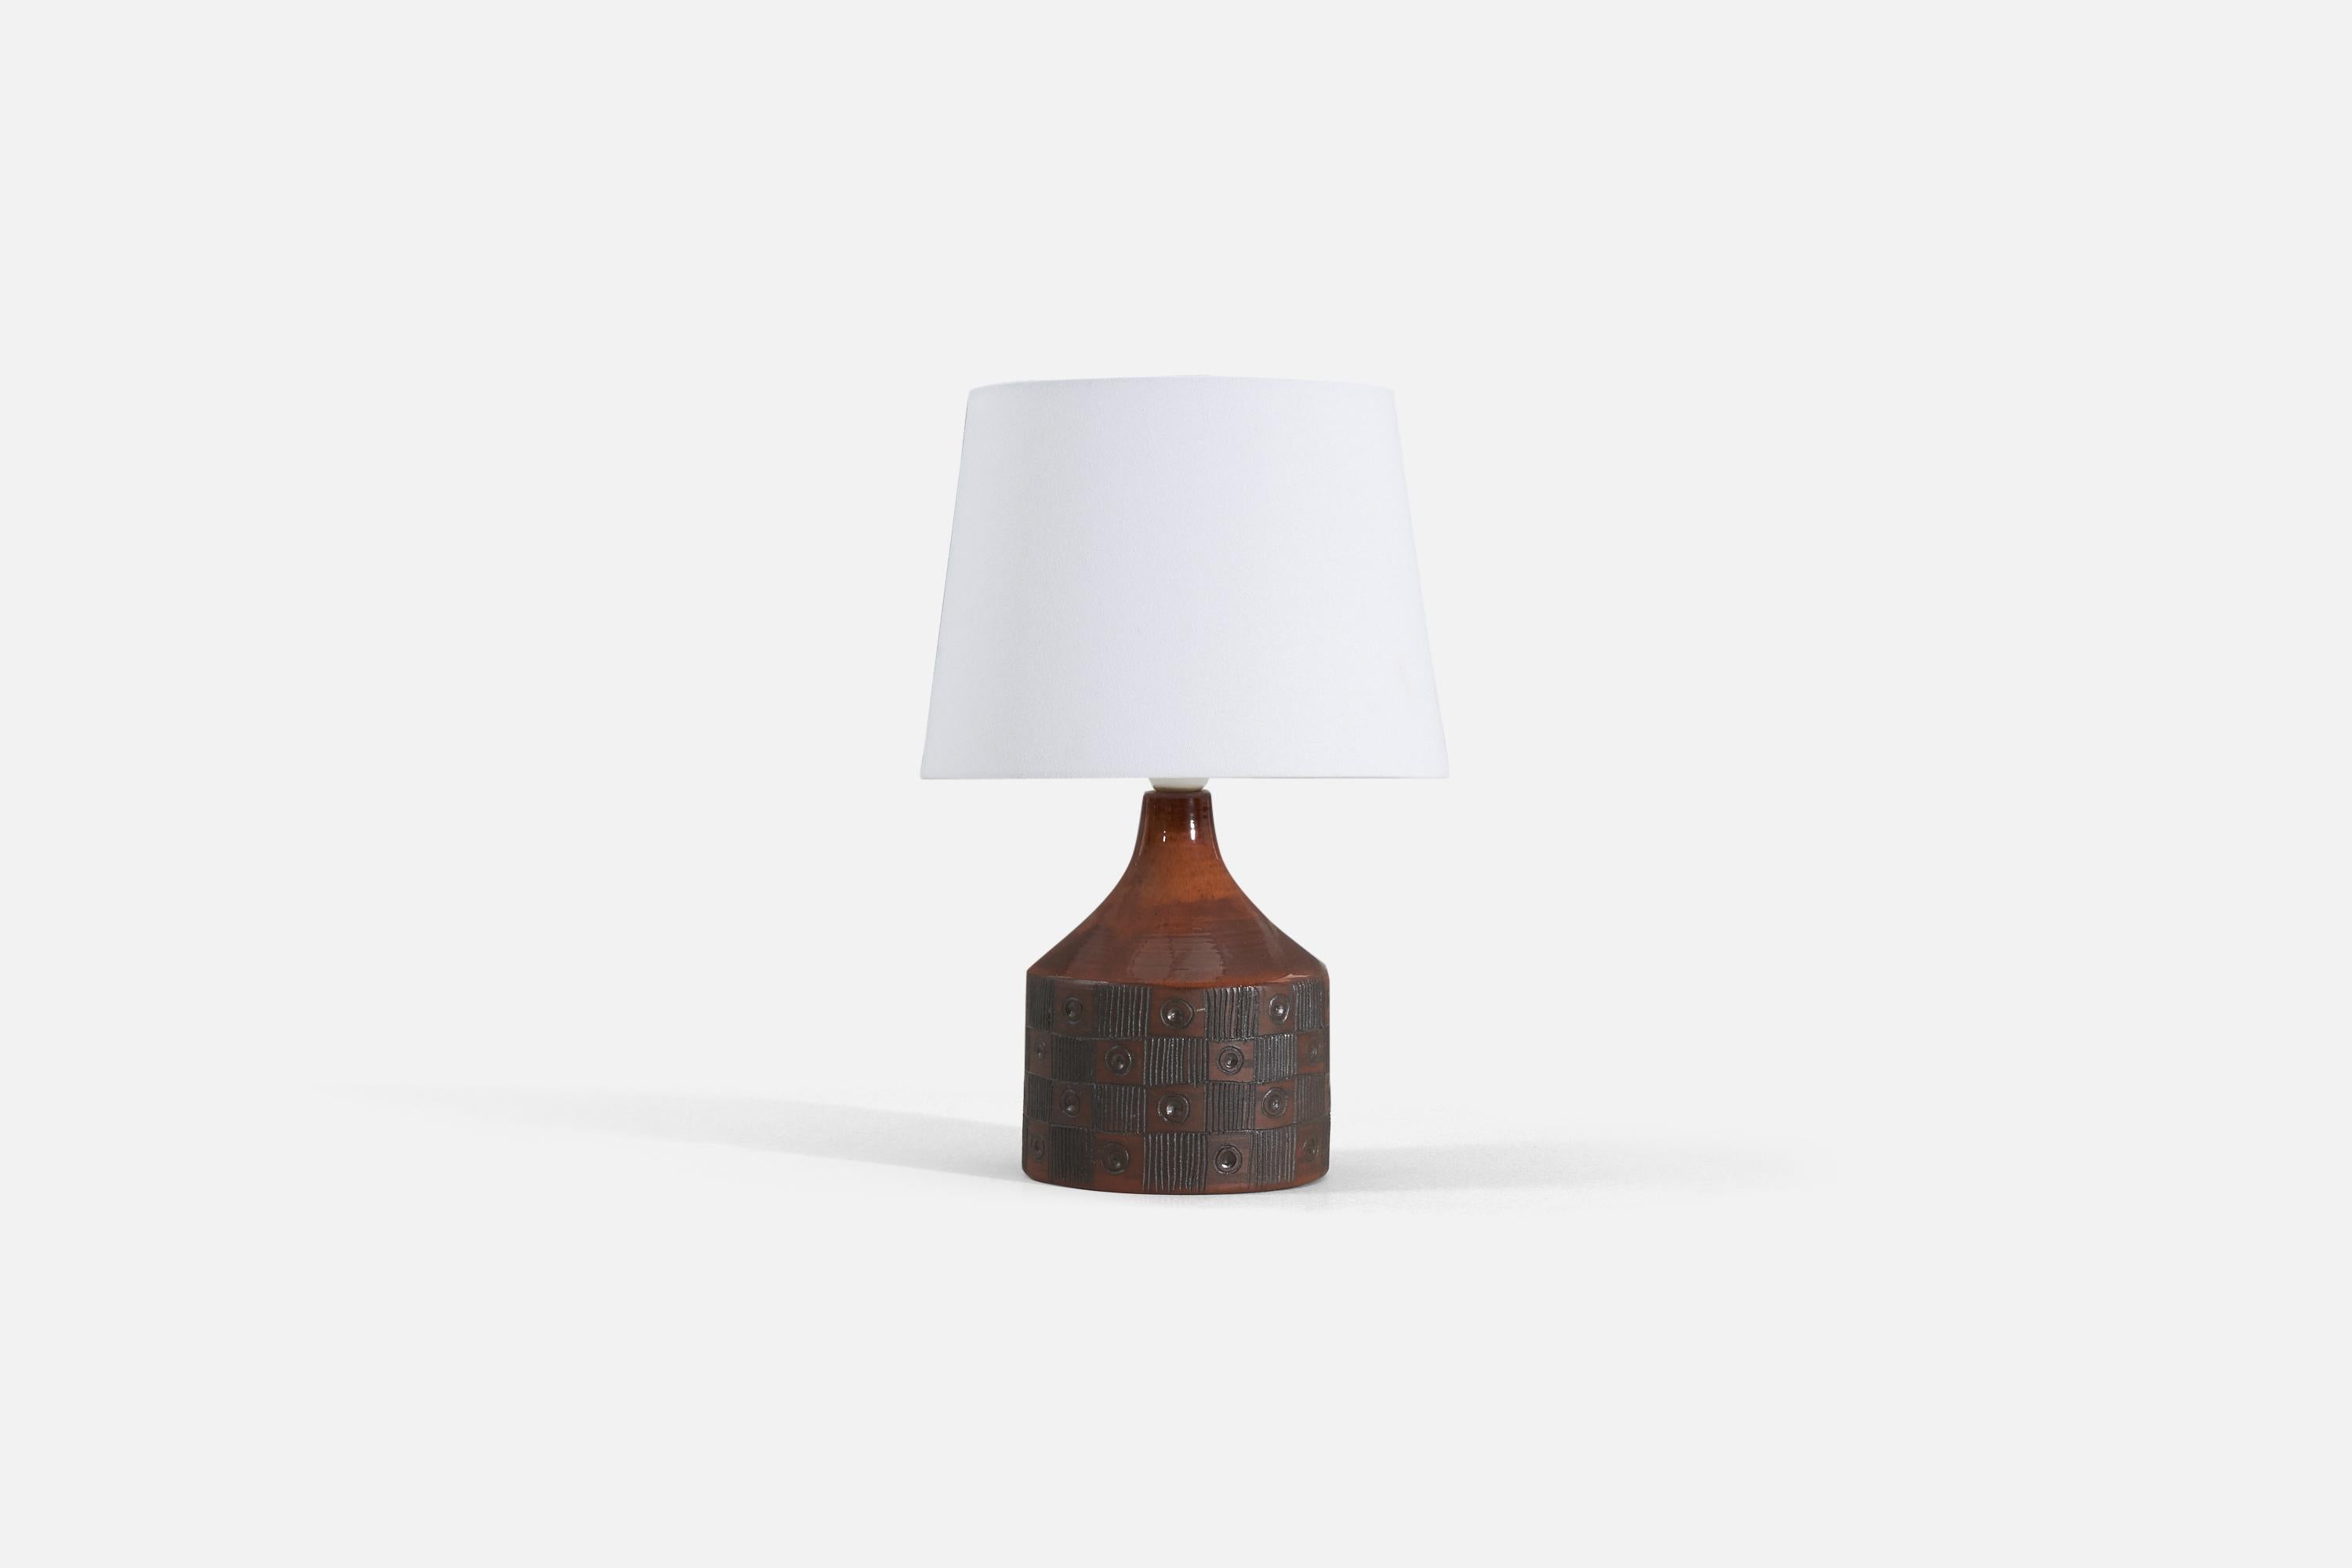 A brown glazed and incised stoneware table lamp designed and produced by Tage Sikker Hansen, Denmark, c. 1960s. 

Sold without lampshade. 

Measurements listed are of lamp. 
Shade : 8 x 10 x 7.5
Lamp with shade : 14.5 x 10 x 10.